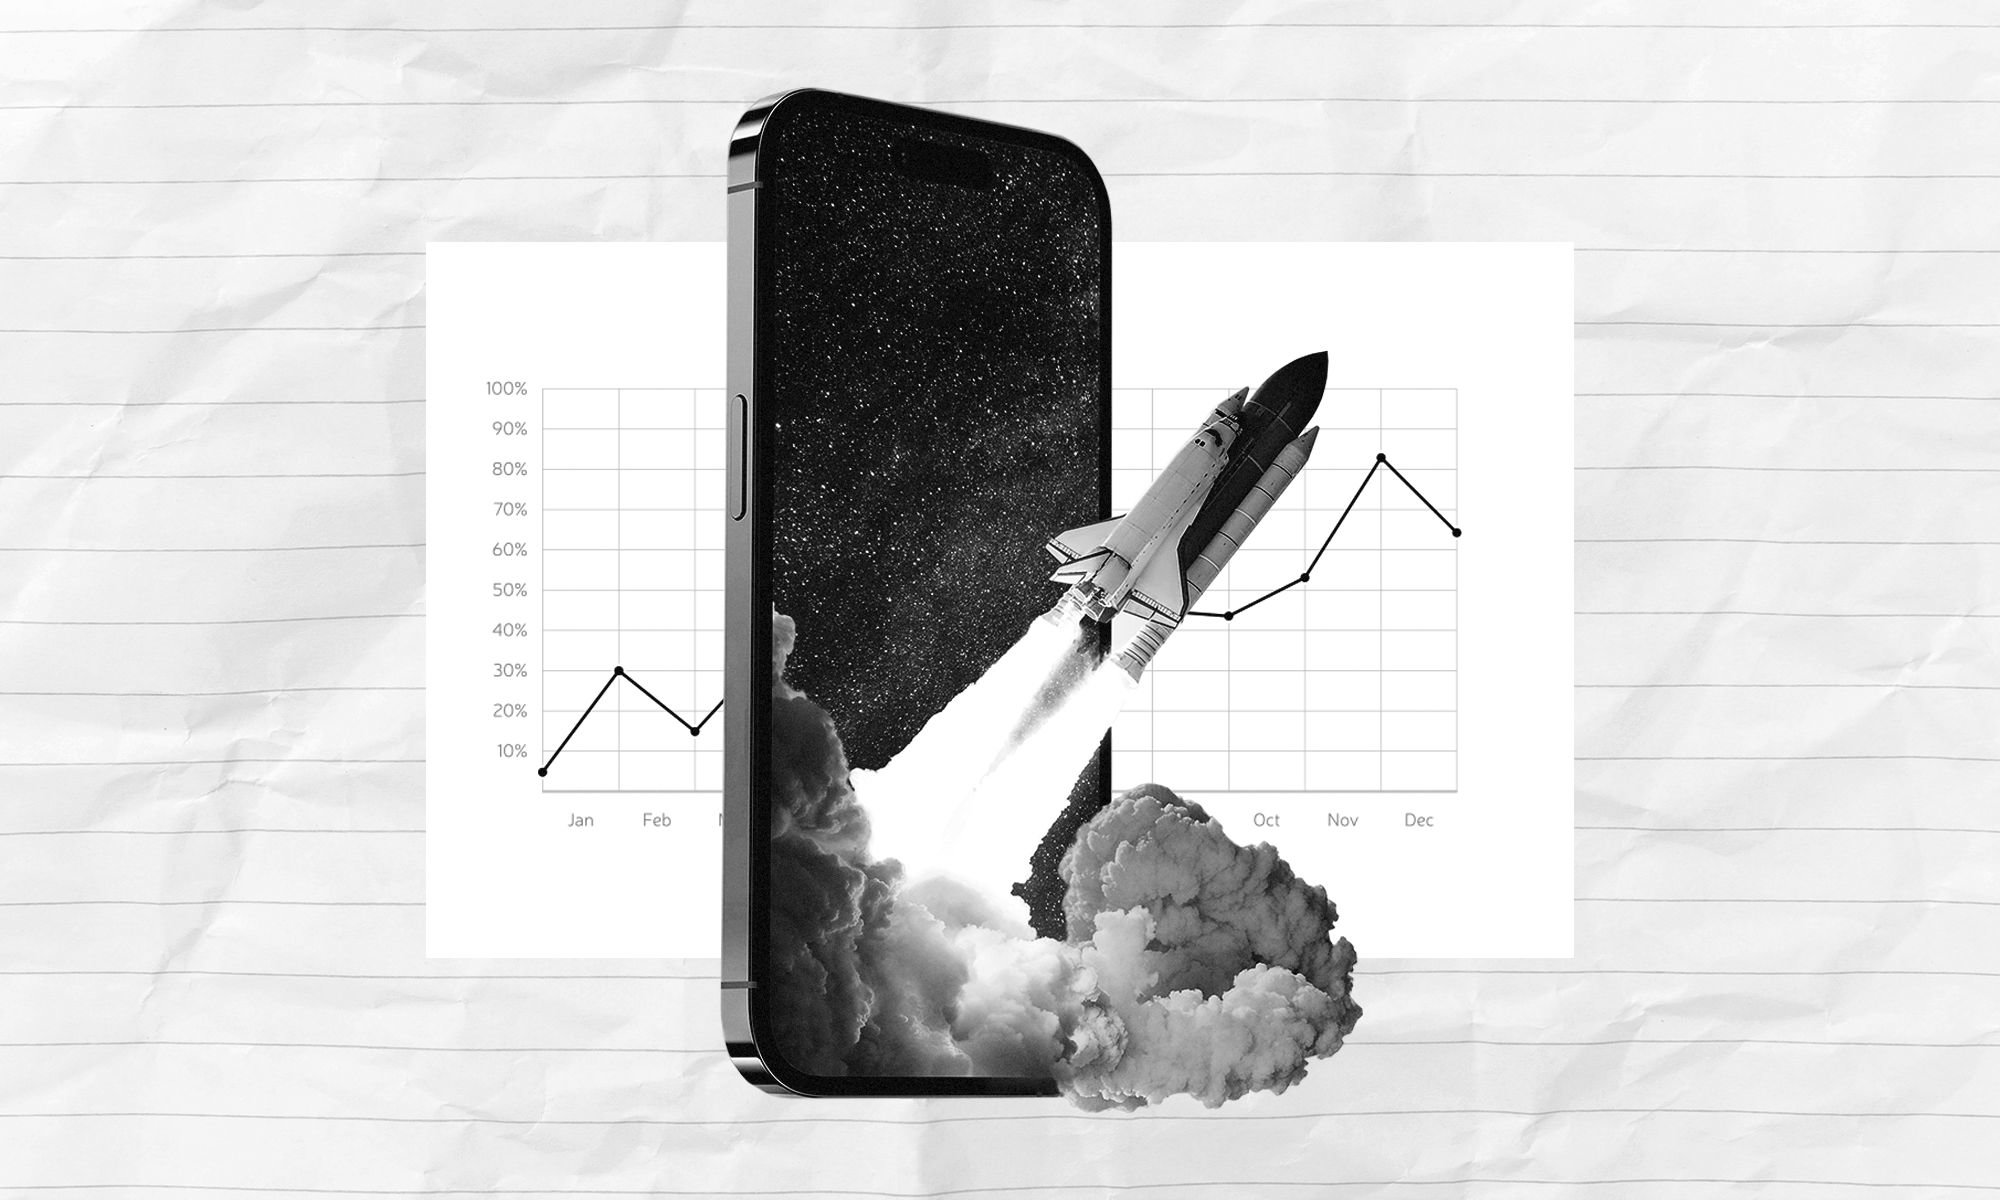 A smartphone with a photo of a rocket bursting from the screen in the foreground with an image of a graph in the background.